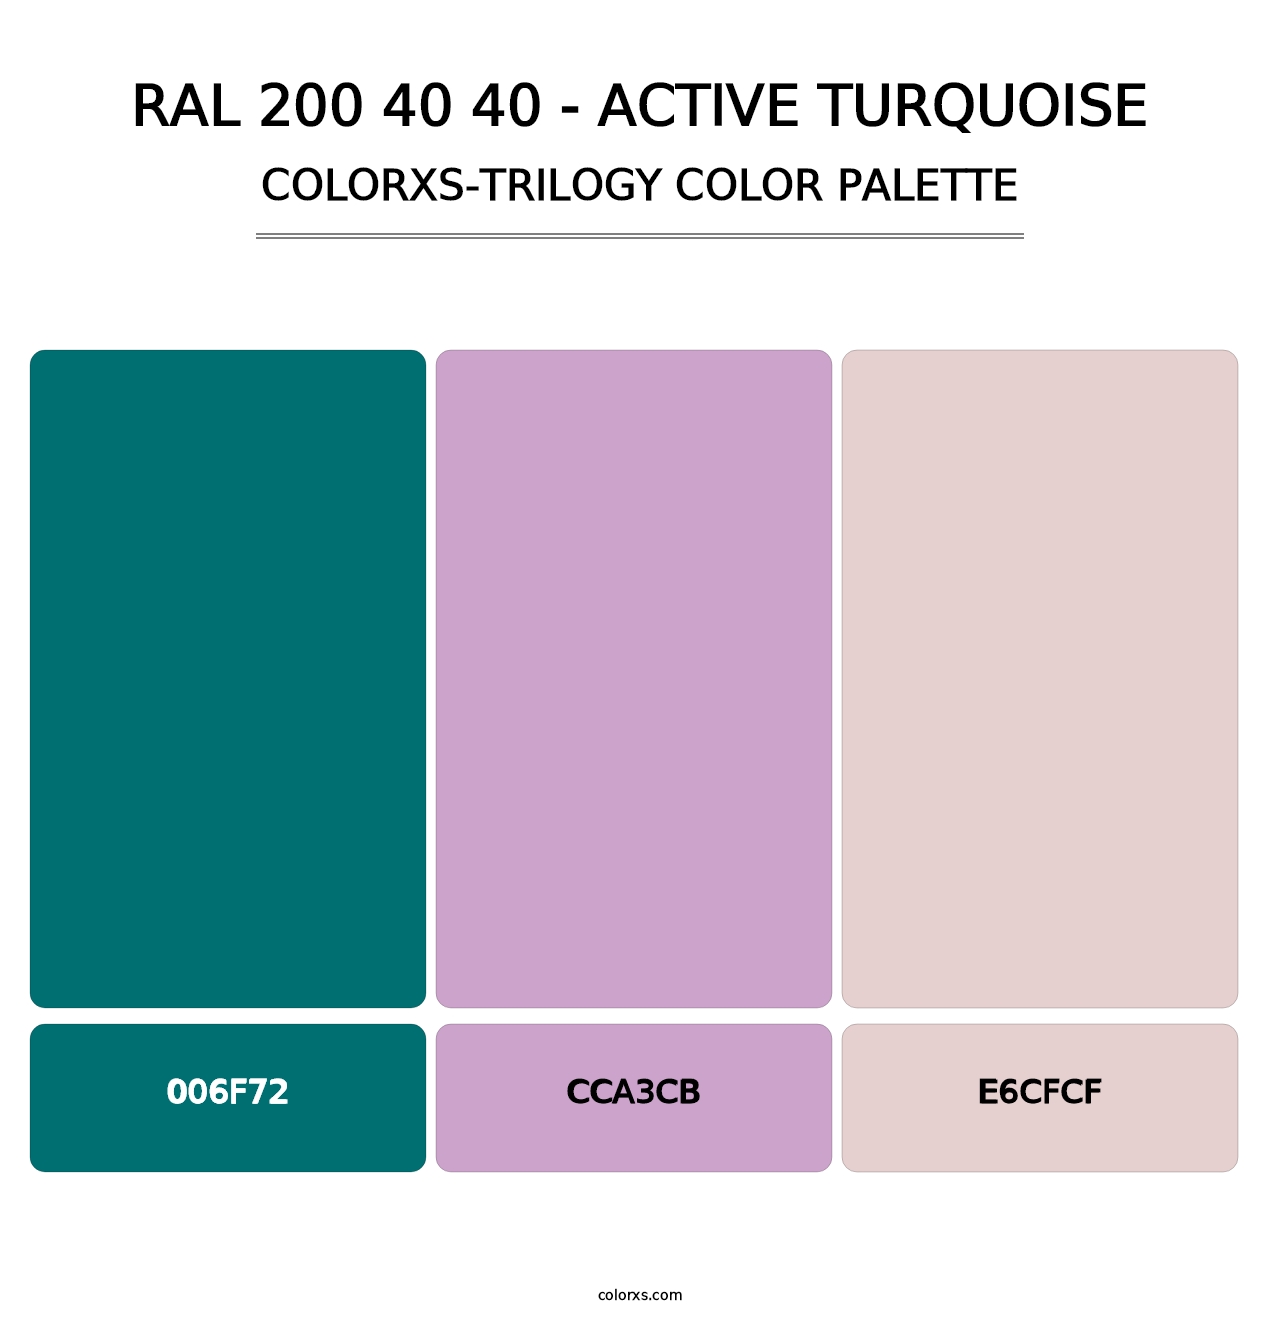 RAL 200 40 40 - Active Turquoise - Colorxs Trilogy Palette